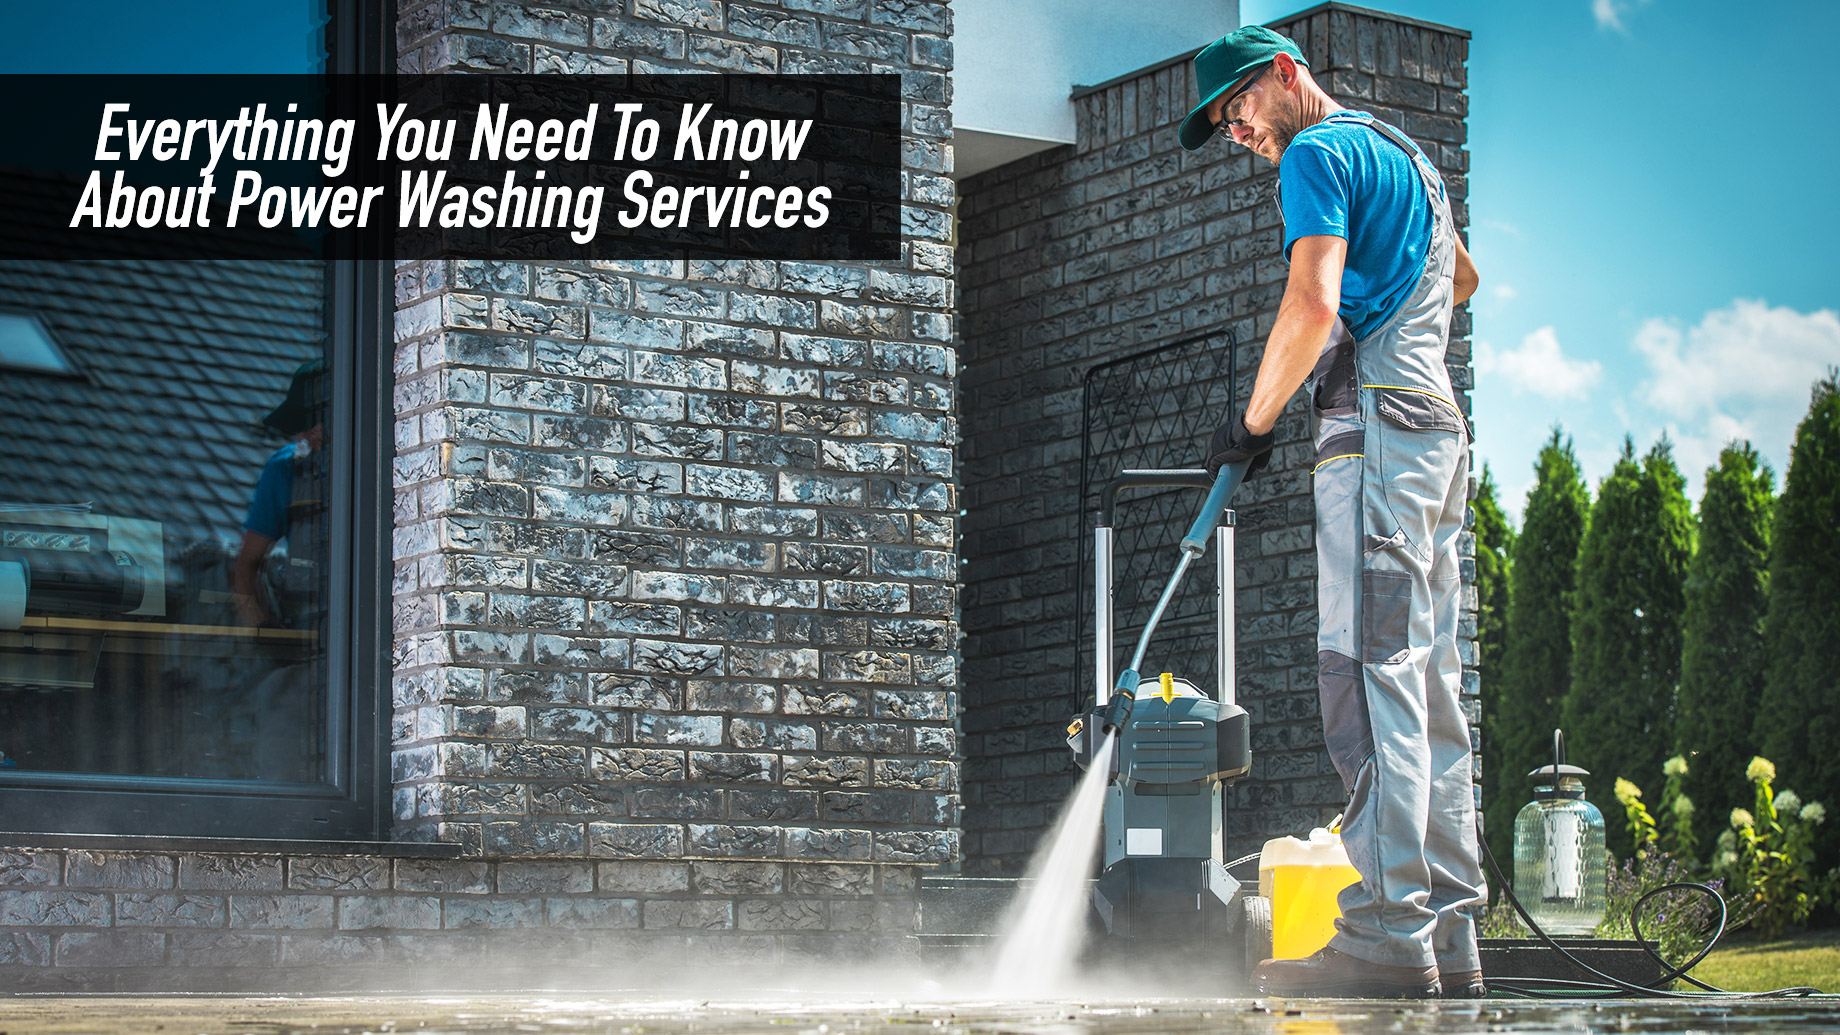 Pressure Washing Services in Bowie MD